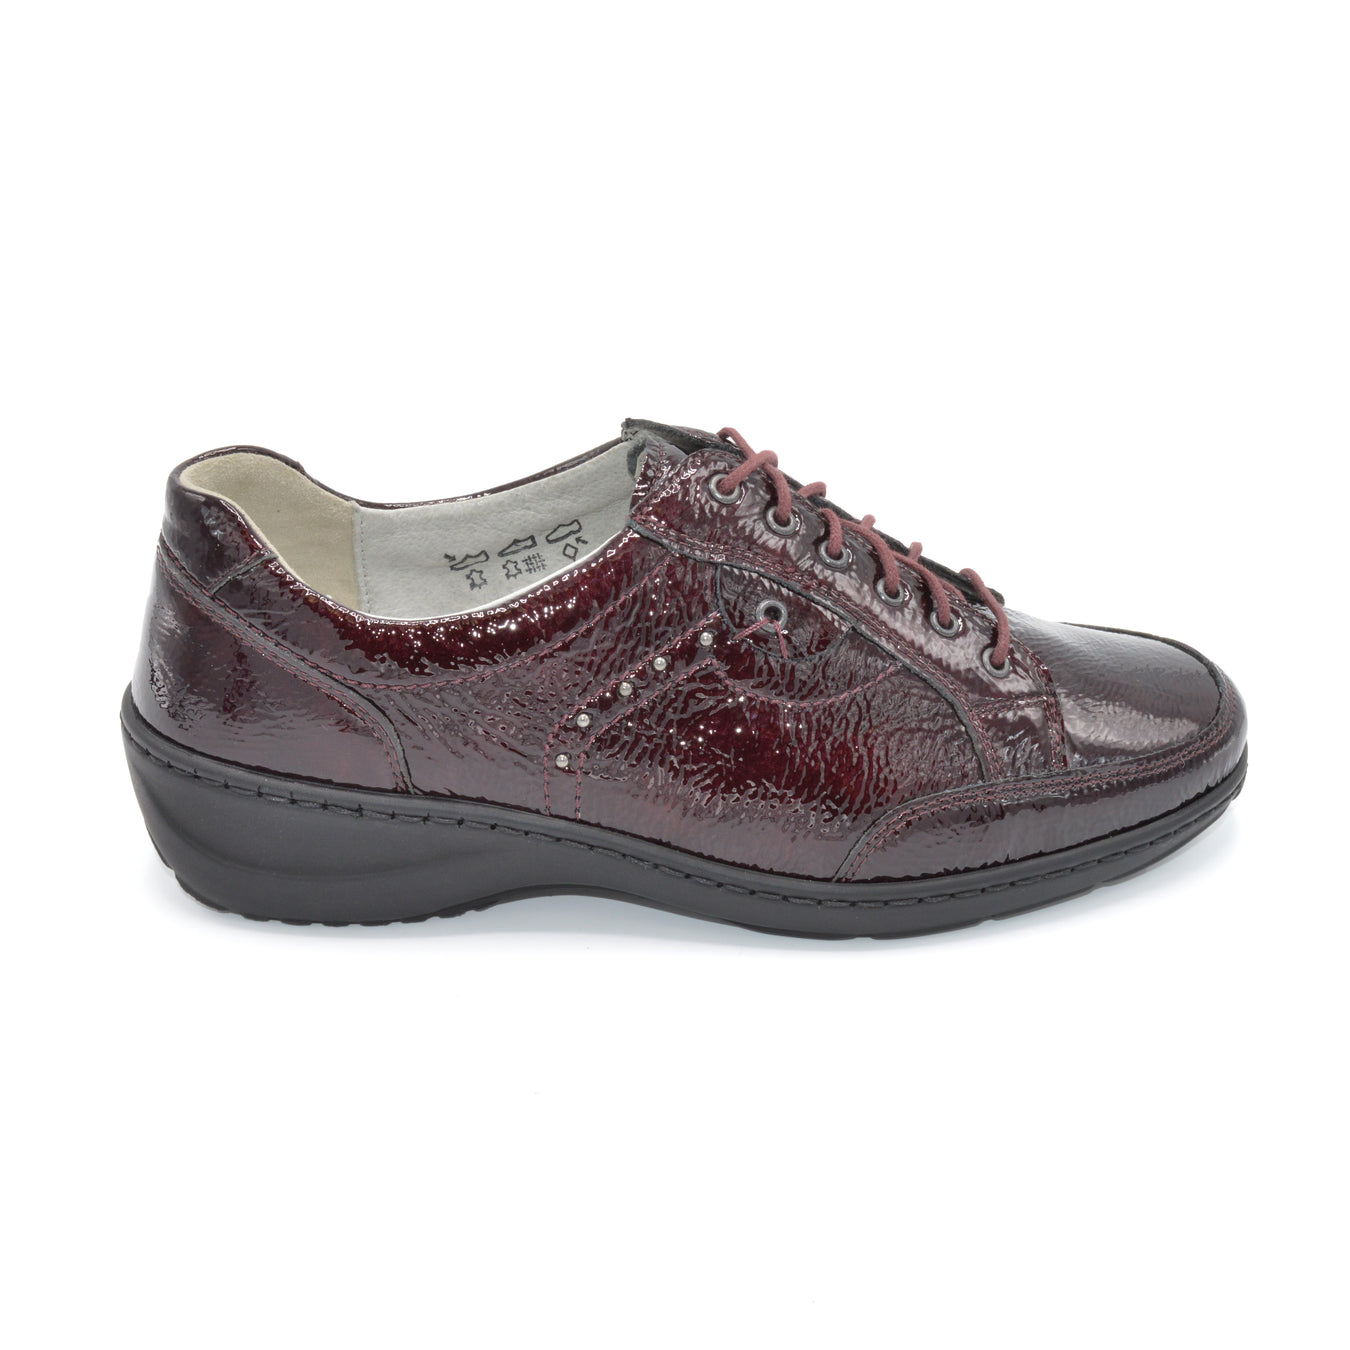 Ladies's Wide Fit Shoes For Orthotics